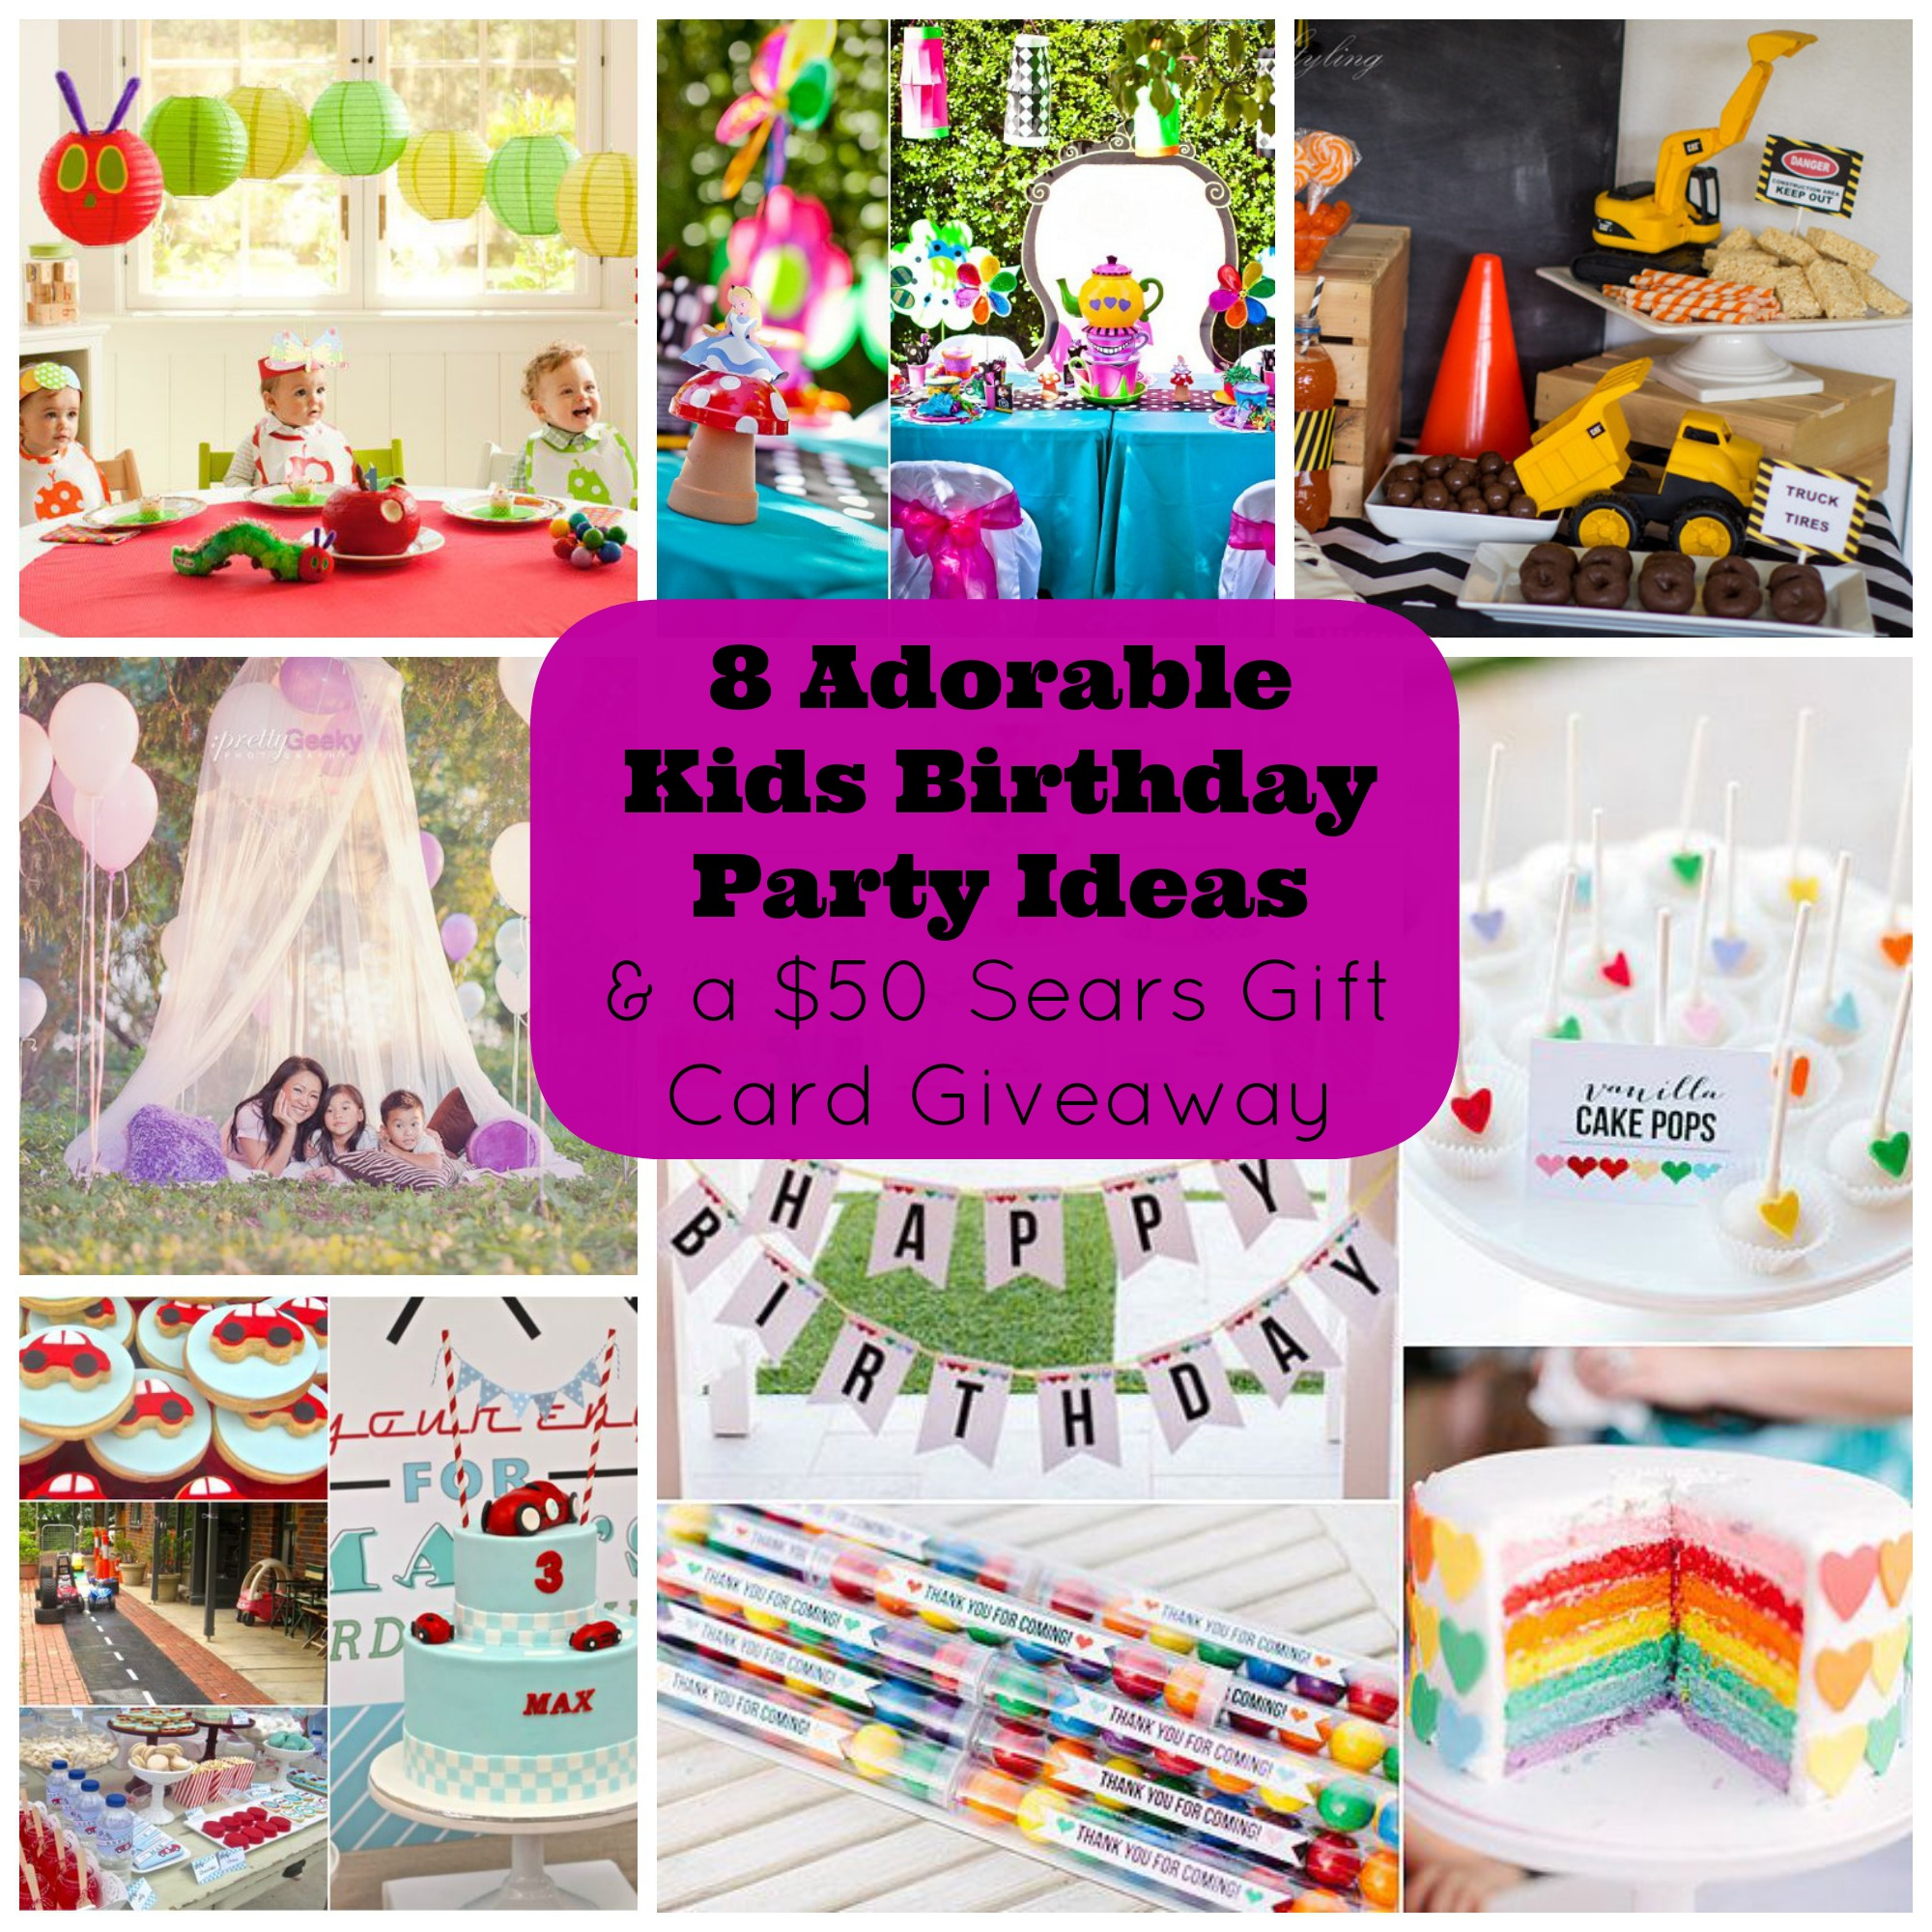 Gift Card Birthday Ideas 8 Adorable Kids Birthday Party Ideas And A Giveaway For A 50 Sears